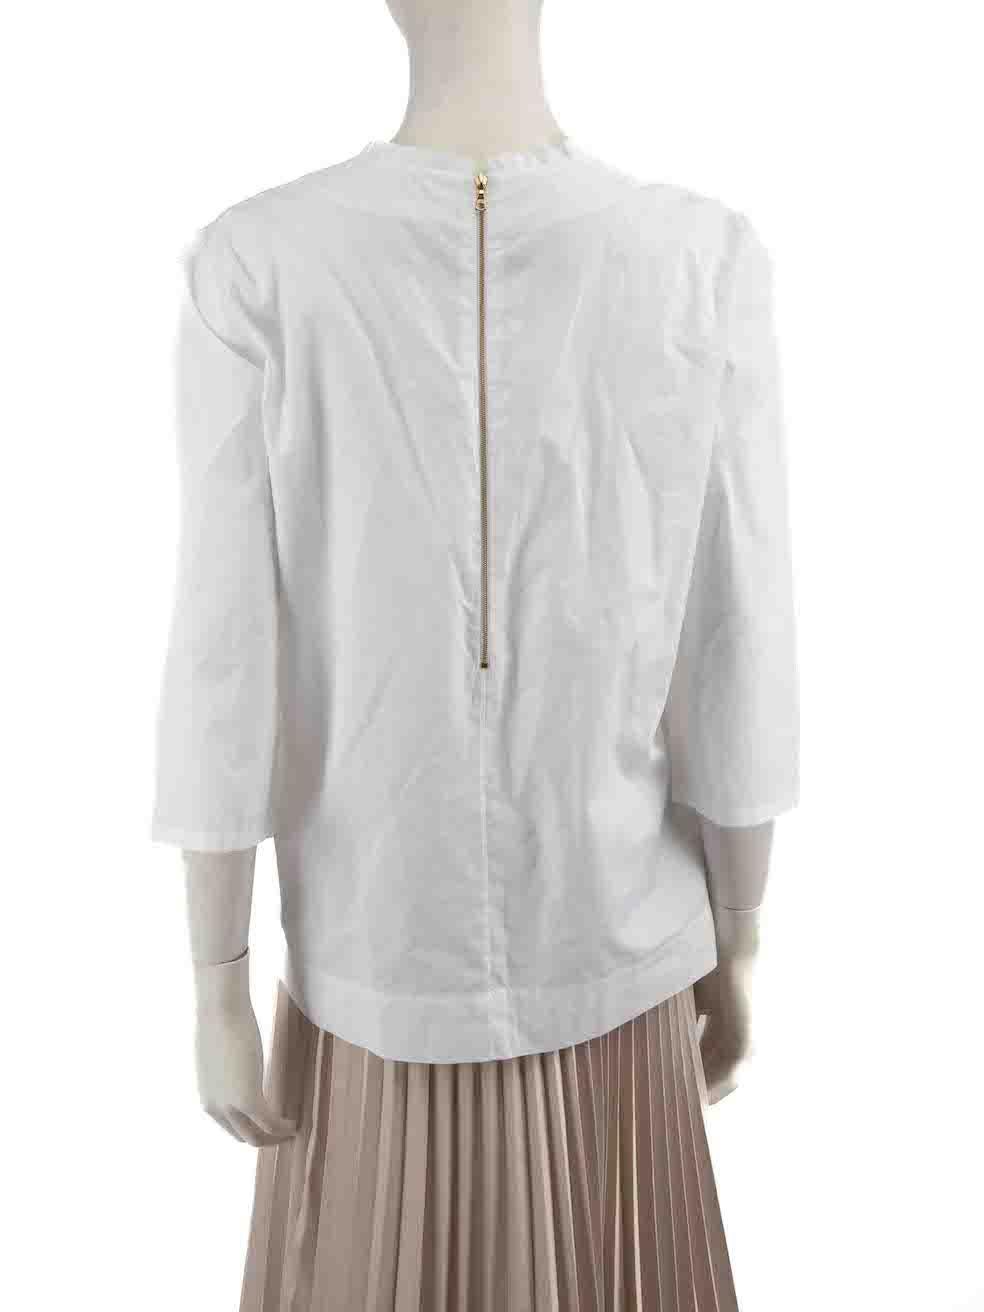 Marni S/S13 White Neck Tie Long Sleeve Blouse Size L In Good Condition For Sale In London, GB